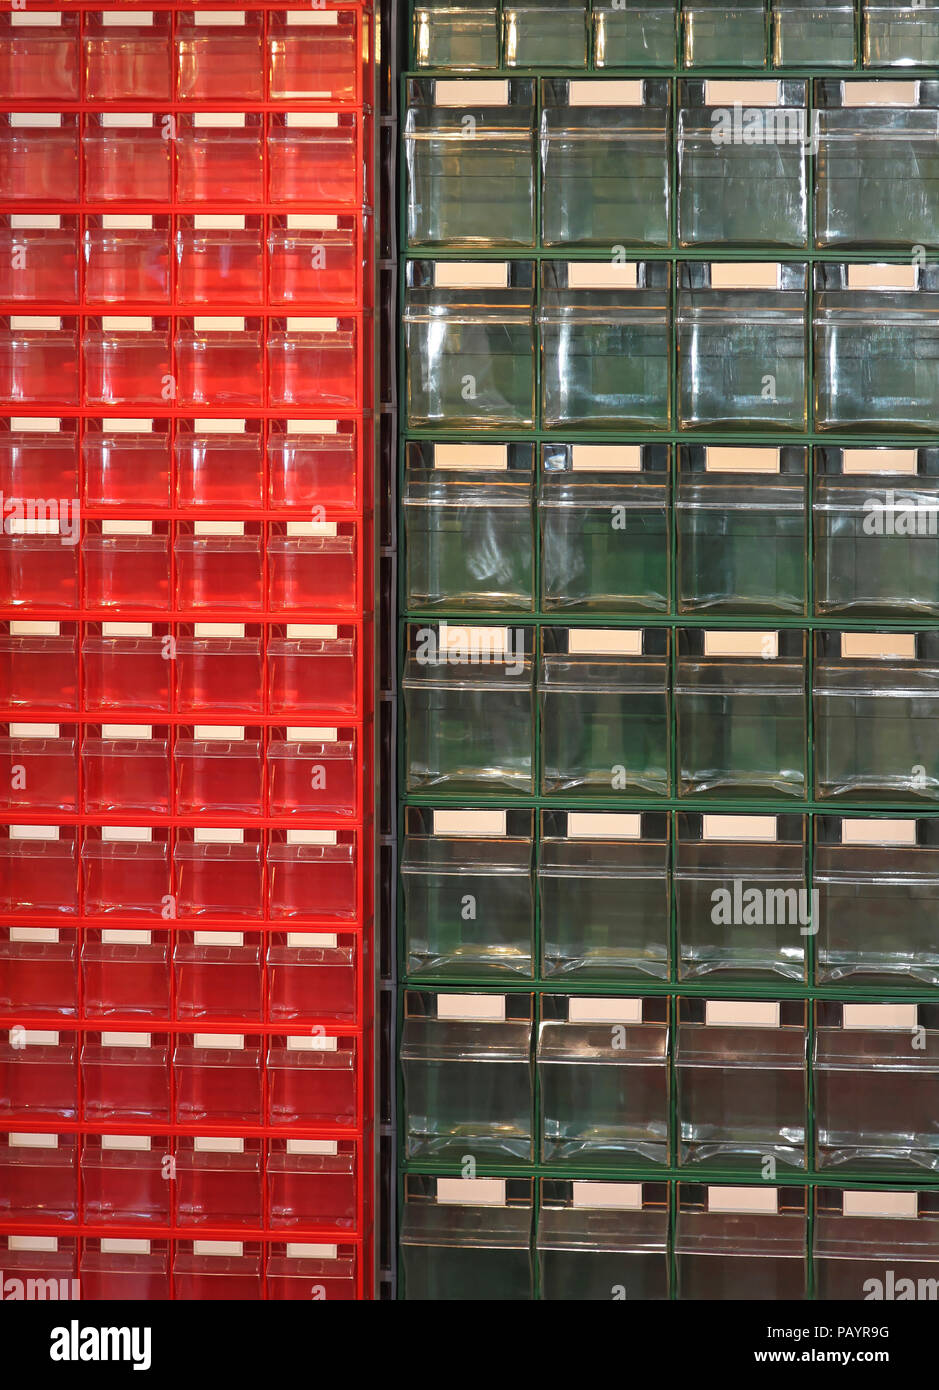 Red And Green Plastic Drawers For Small Parts Stock Photo